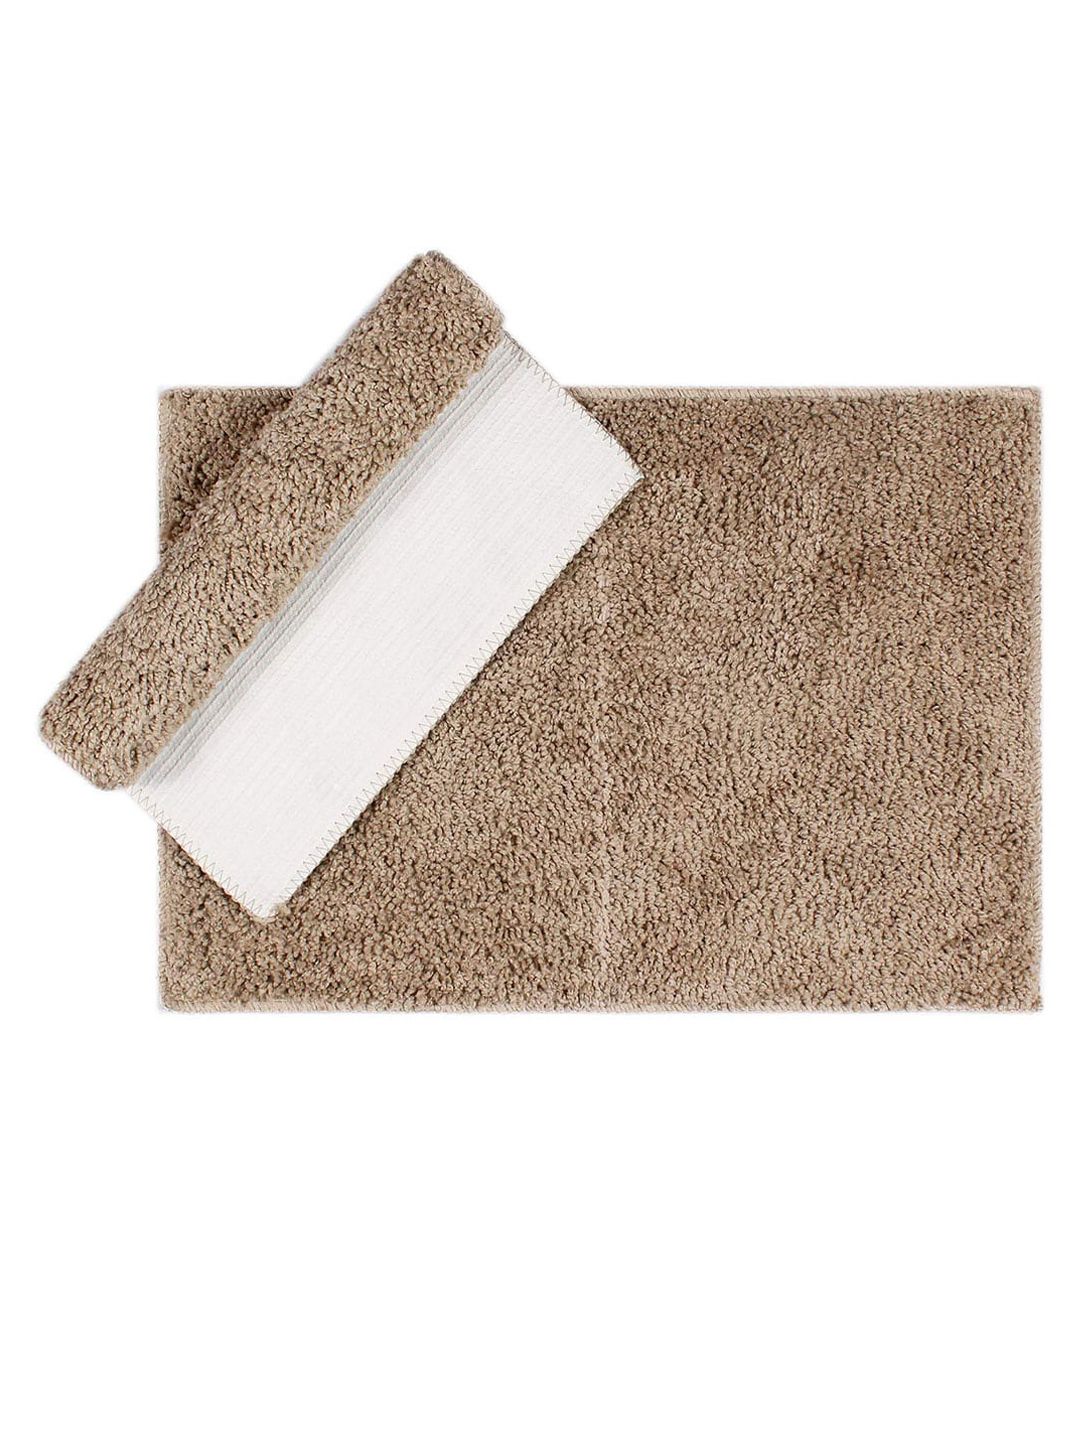 LUXEHOME INTERNATIONAL Beige Solid Bath Rug Price in India